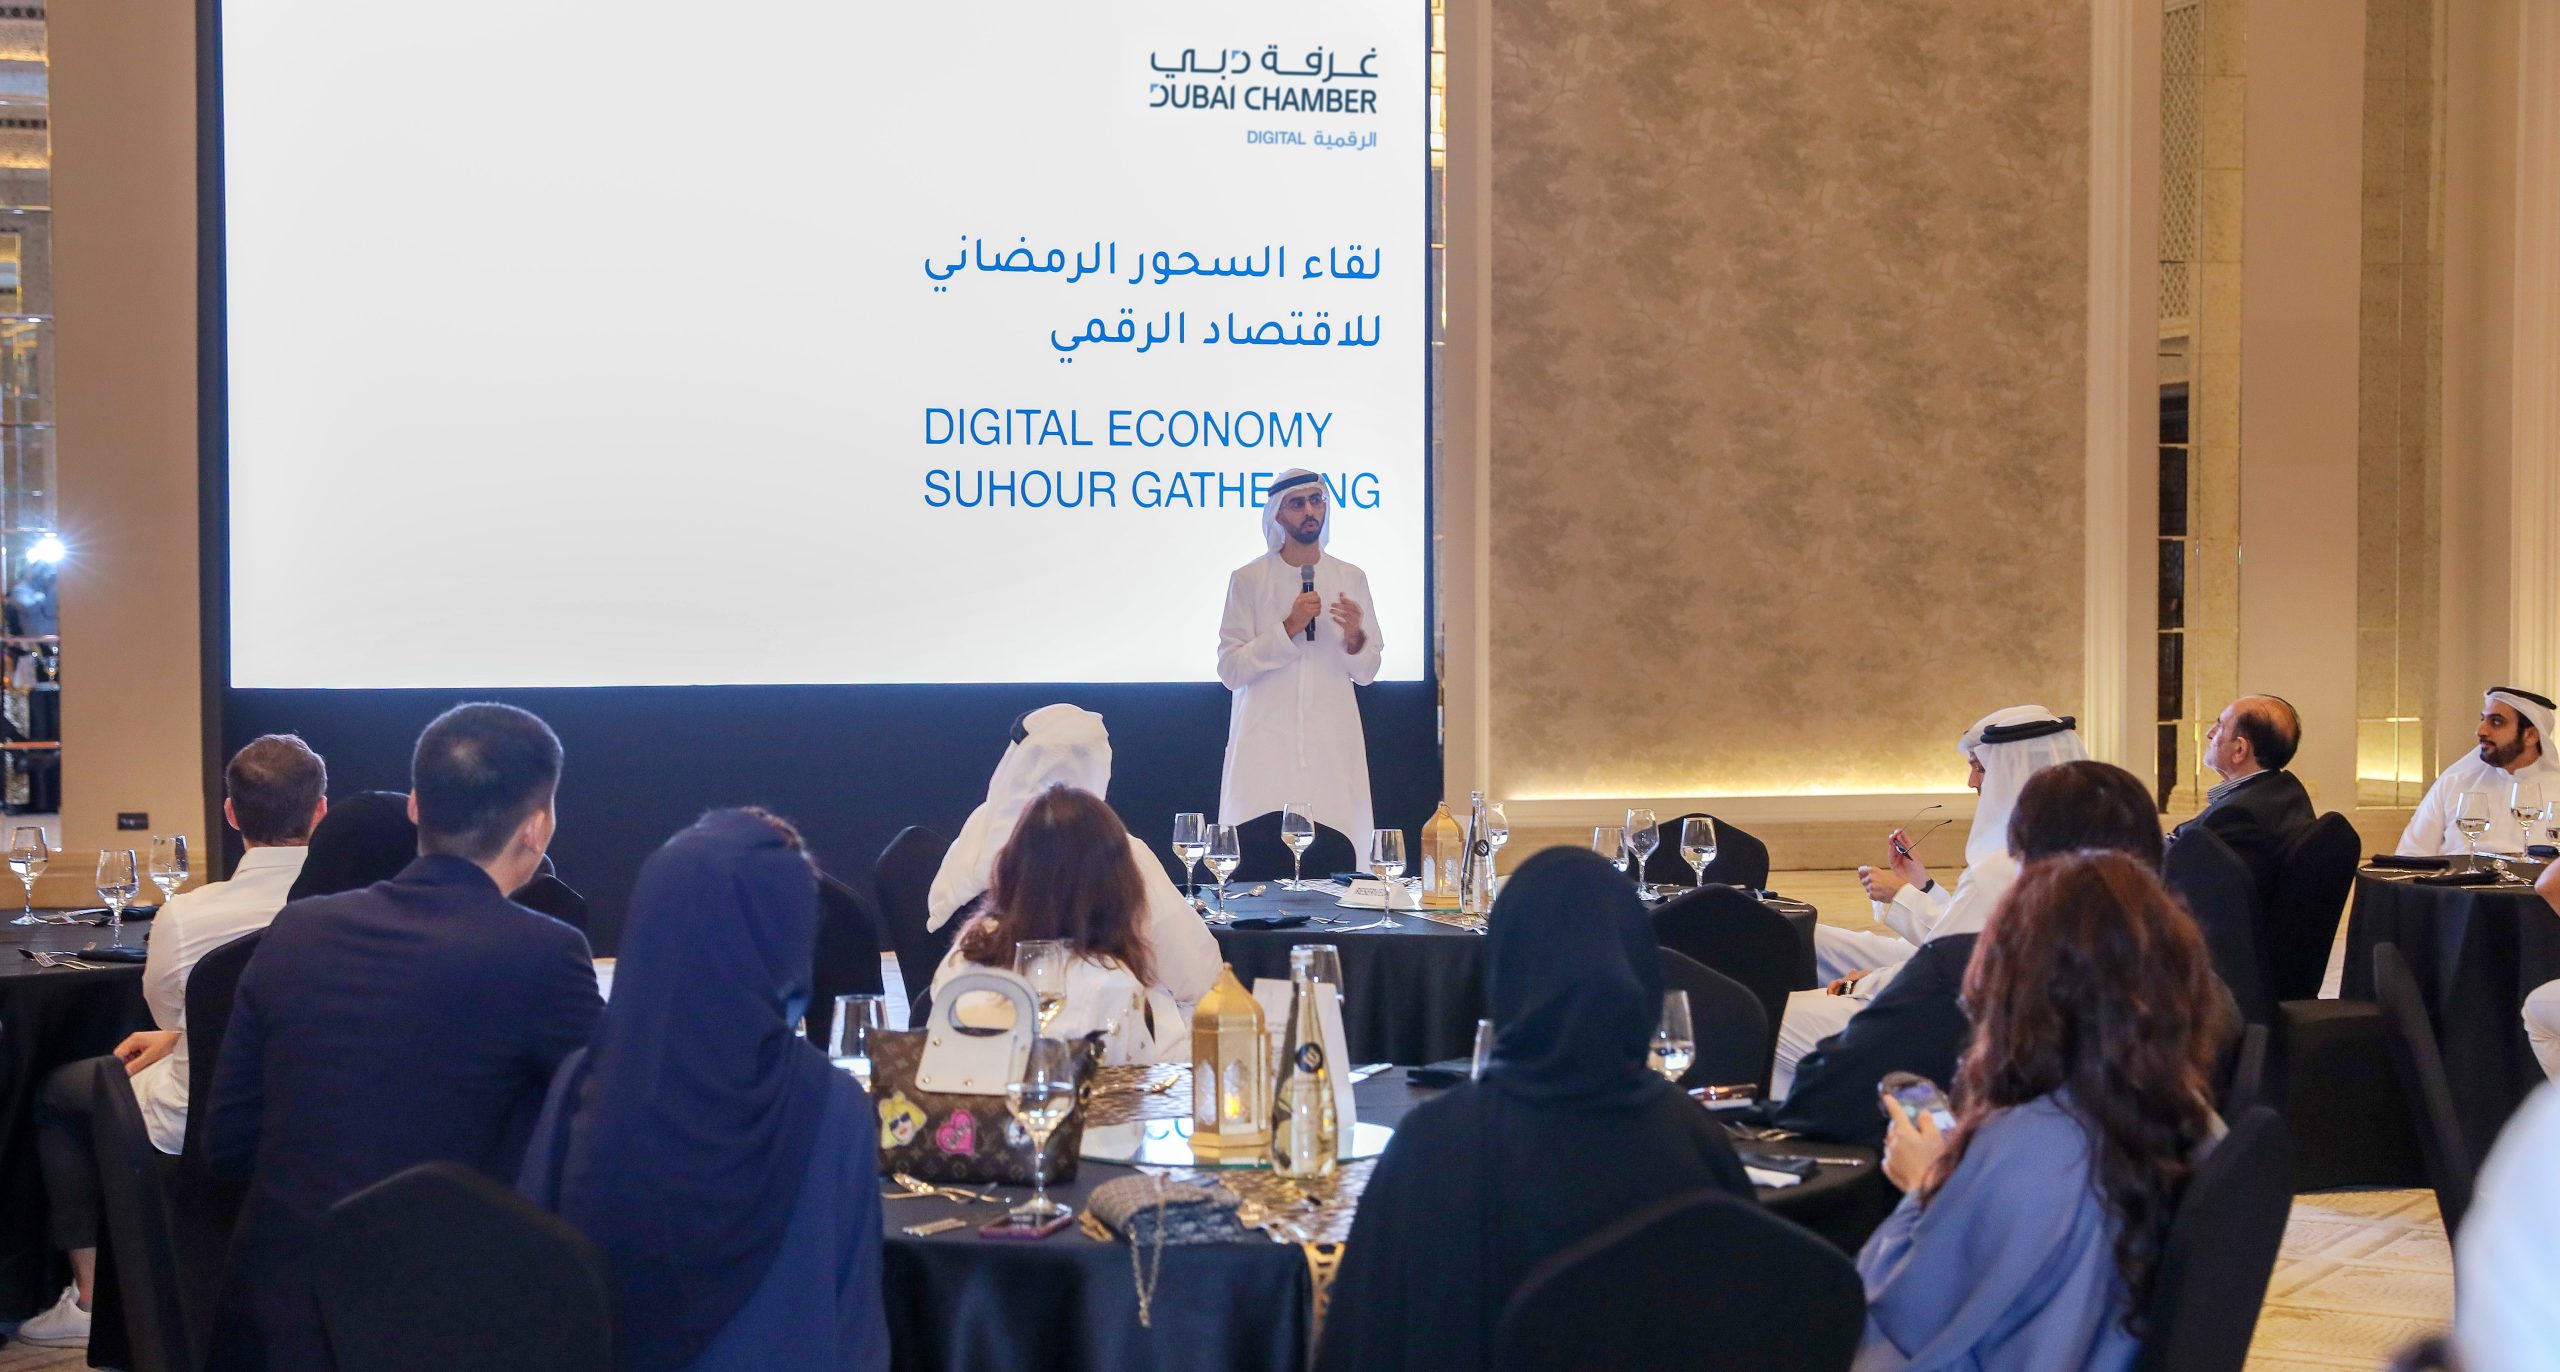 Dubai Chamber of Digital Economy explores private sector empowerment and impact of advanced technology on economic growth